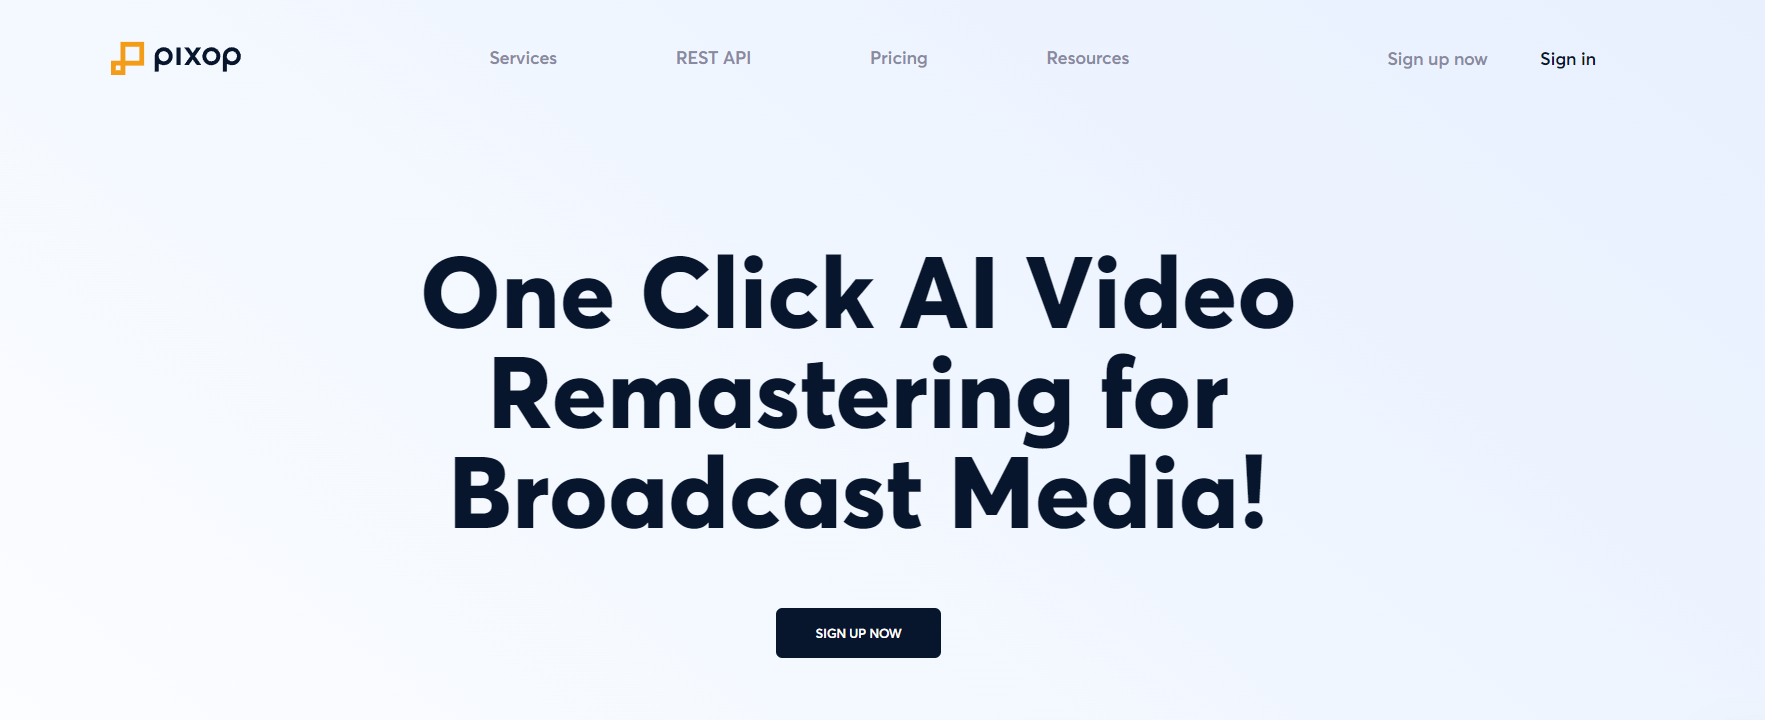 one-click-video-remastering-tool-for-users-in-